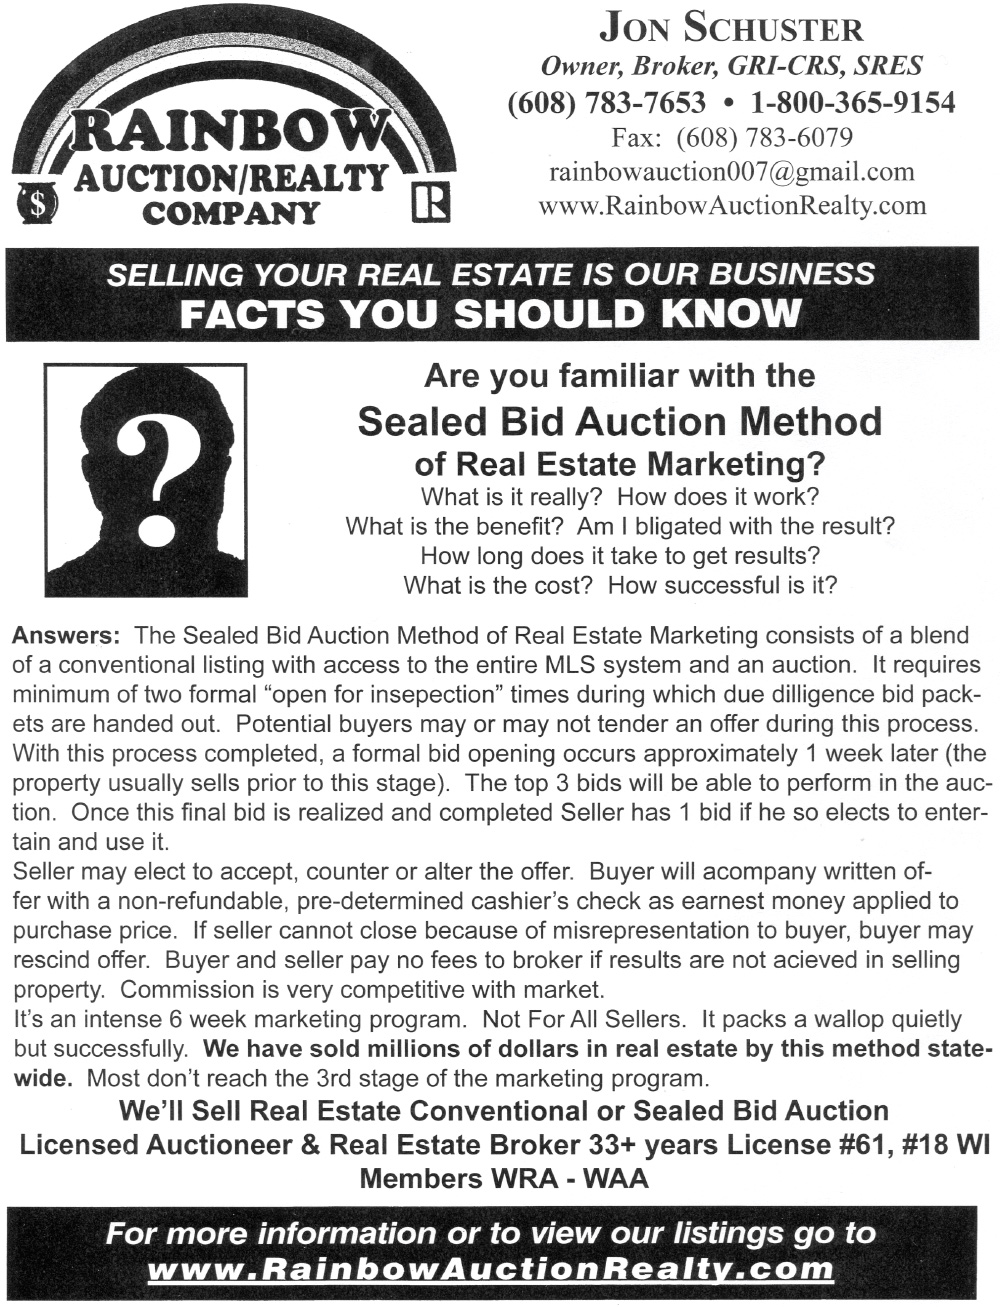 Facts You Should Know about selling your real estate